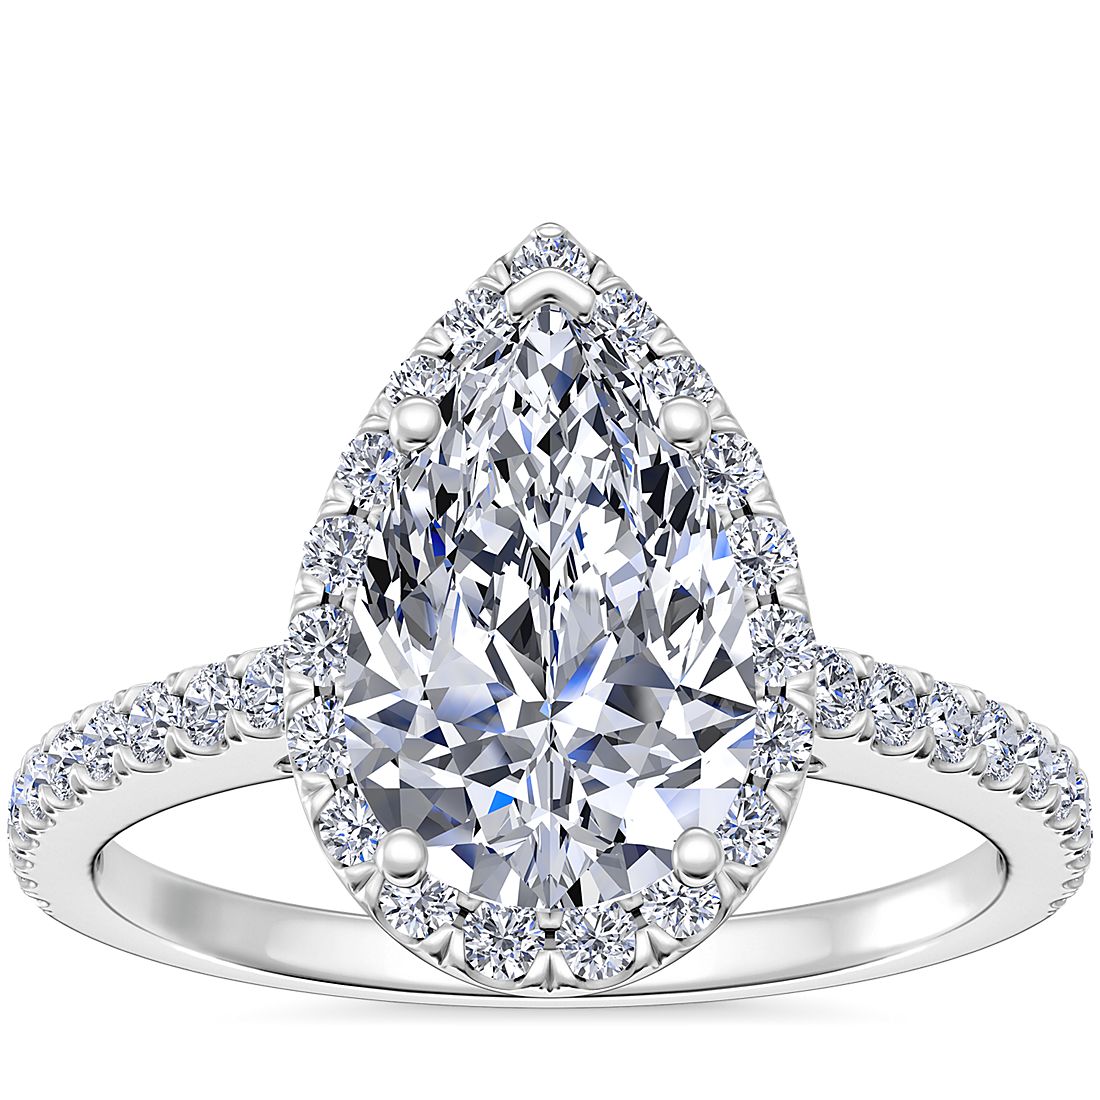 Pear Shaped Halo Diamond Engagement Ring in 14k White Gold